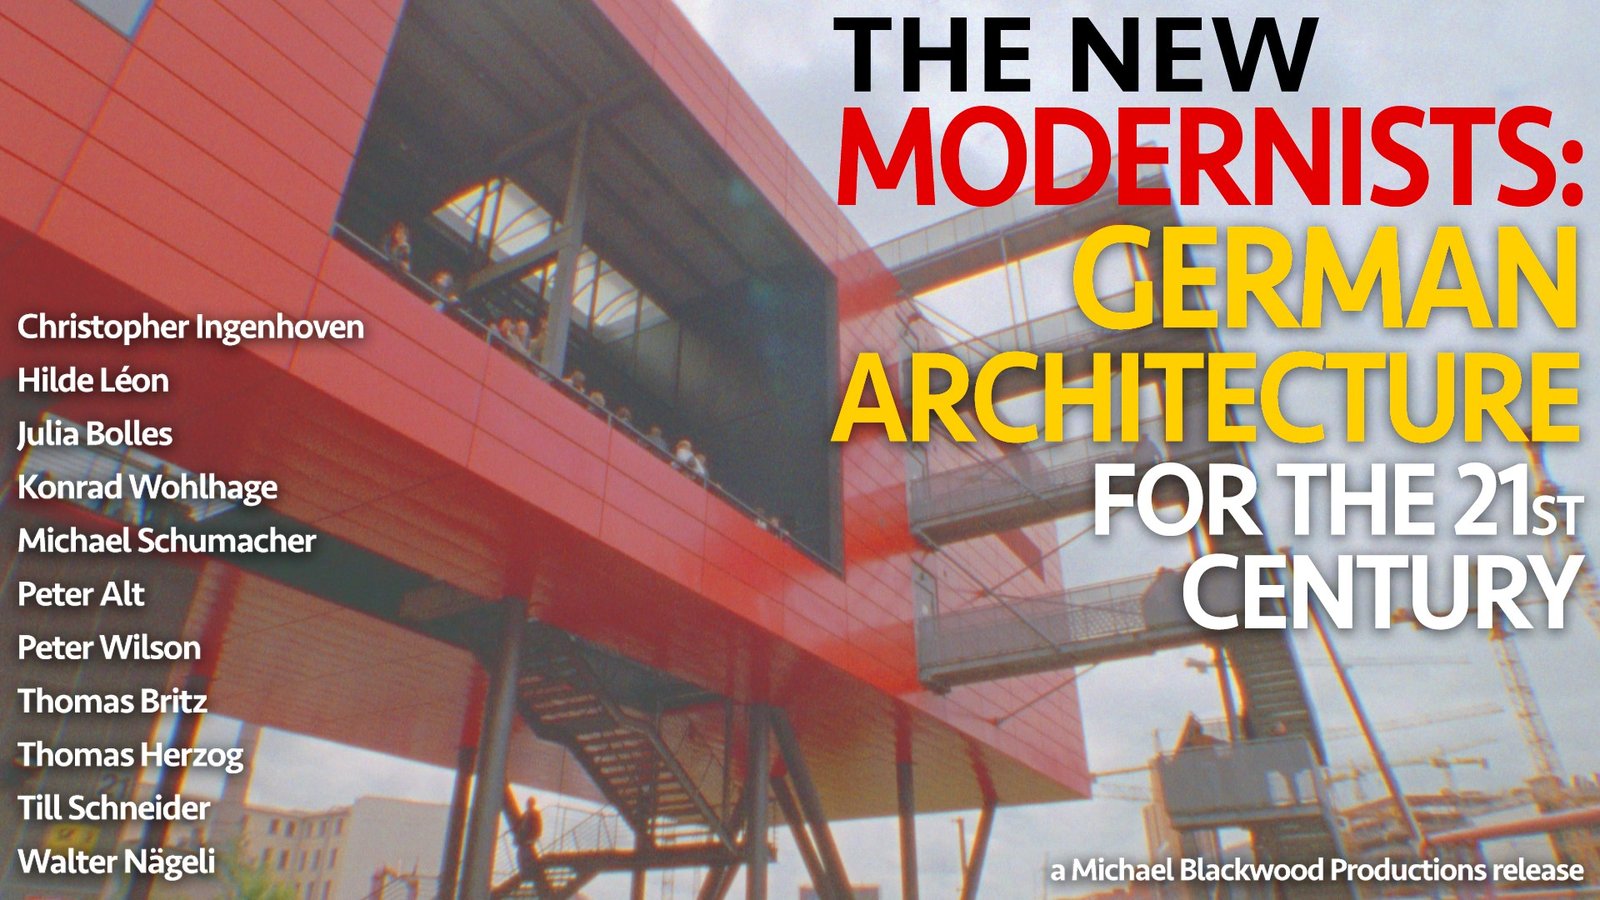 The New Modernists: German Architecture for the 21st Century